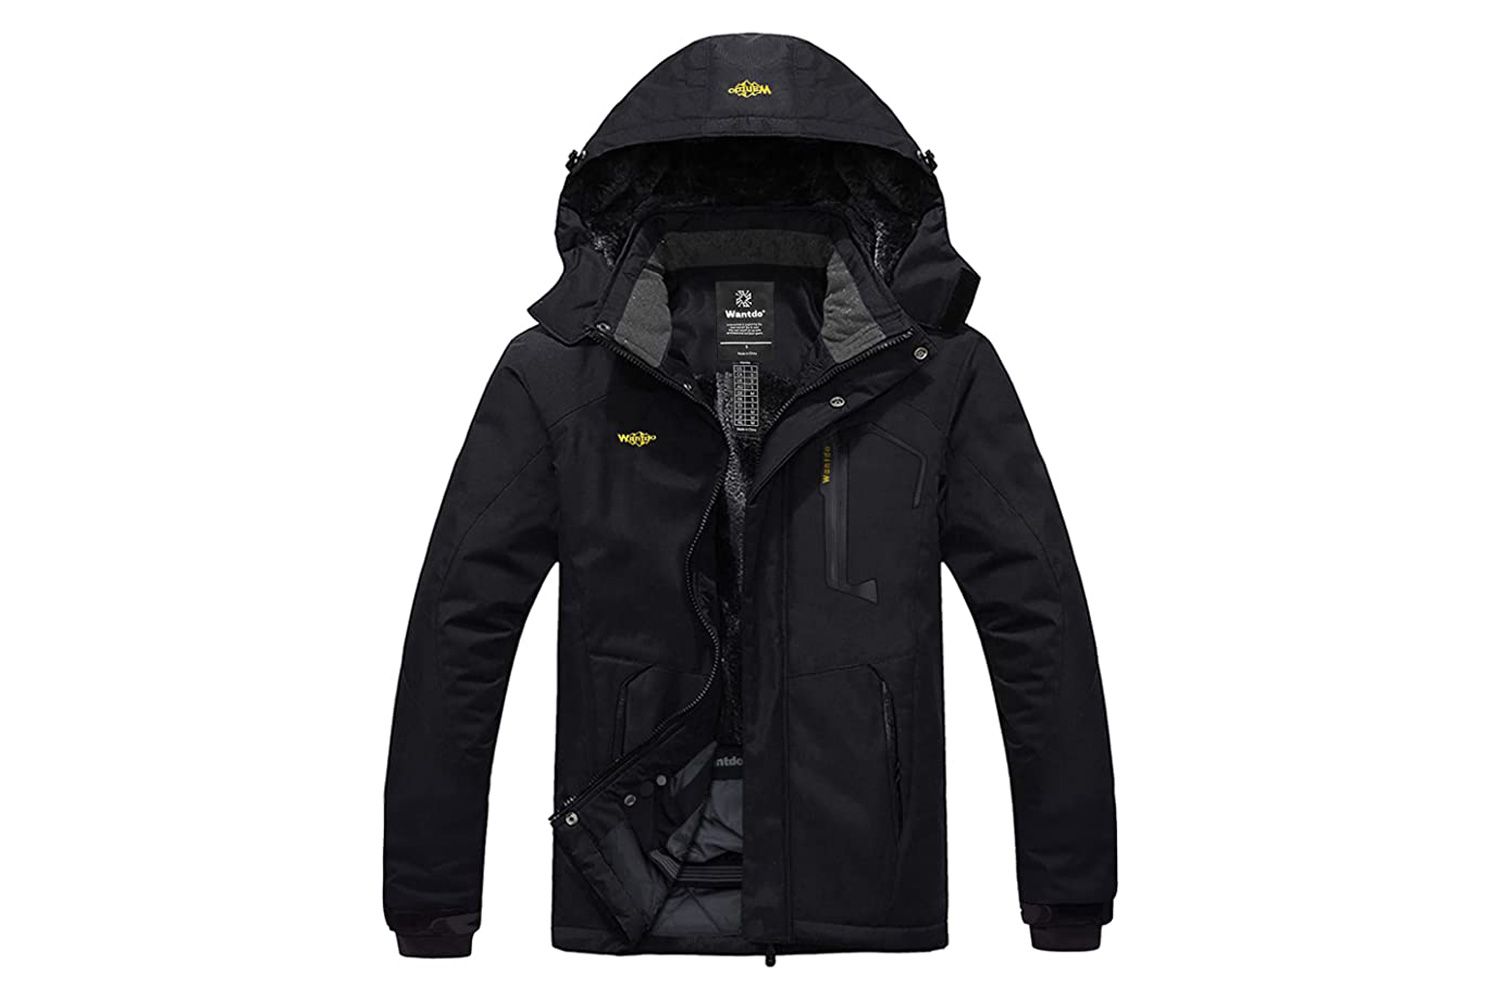 Men’s packable puffer jacket – A Warm Choice for Winter插图3